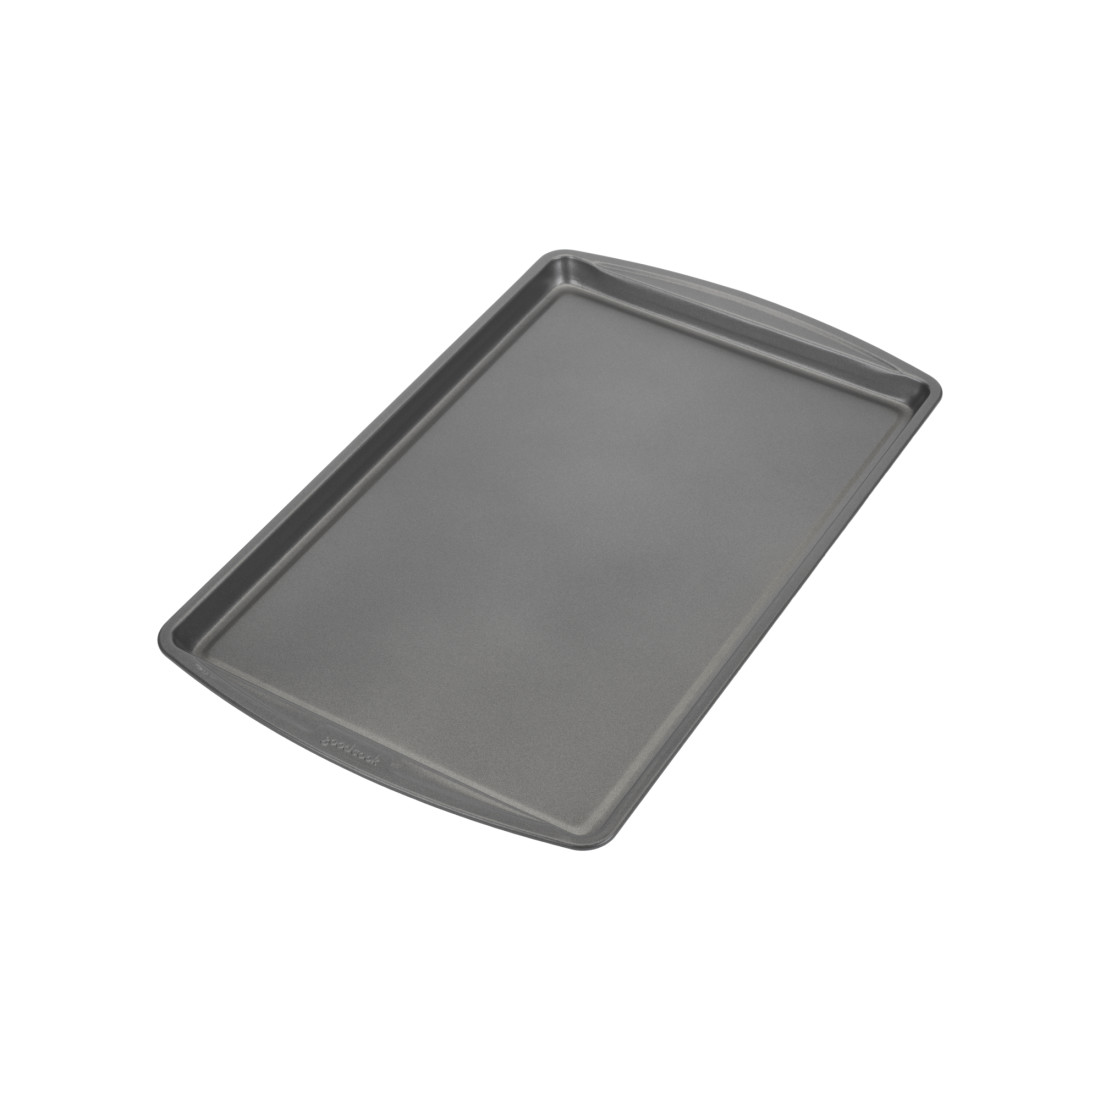 BakeIns 17¼” x 11⅛” Non-Stick Large Cookie Sheet